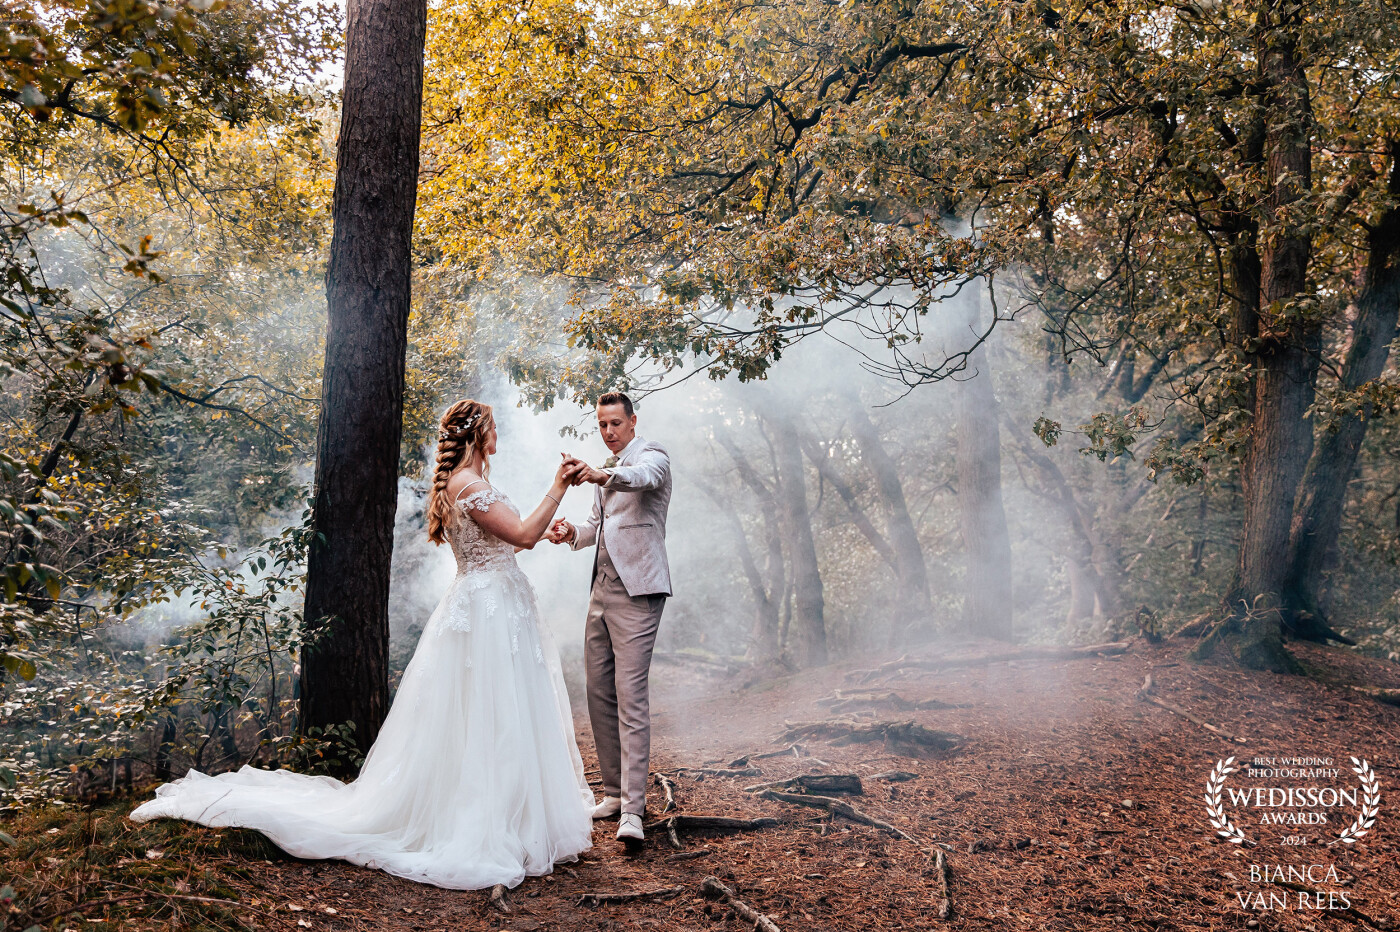 Lovely couple + beautiful forest with beginning fall colours + smoke = succes ;)